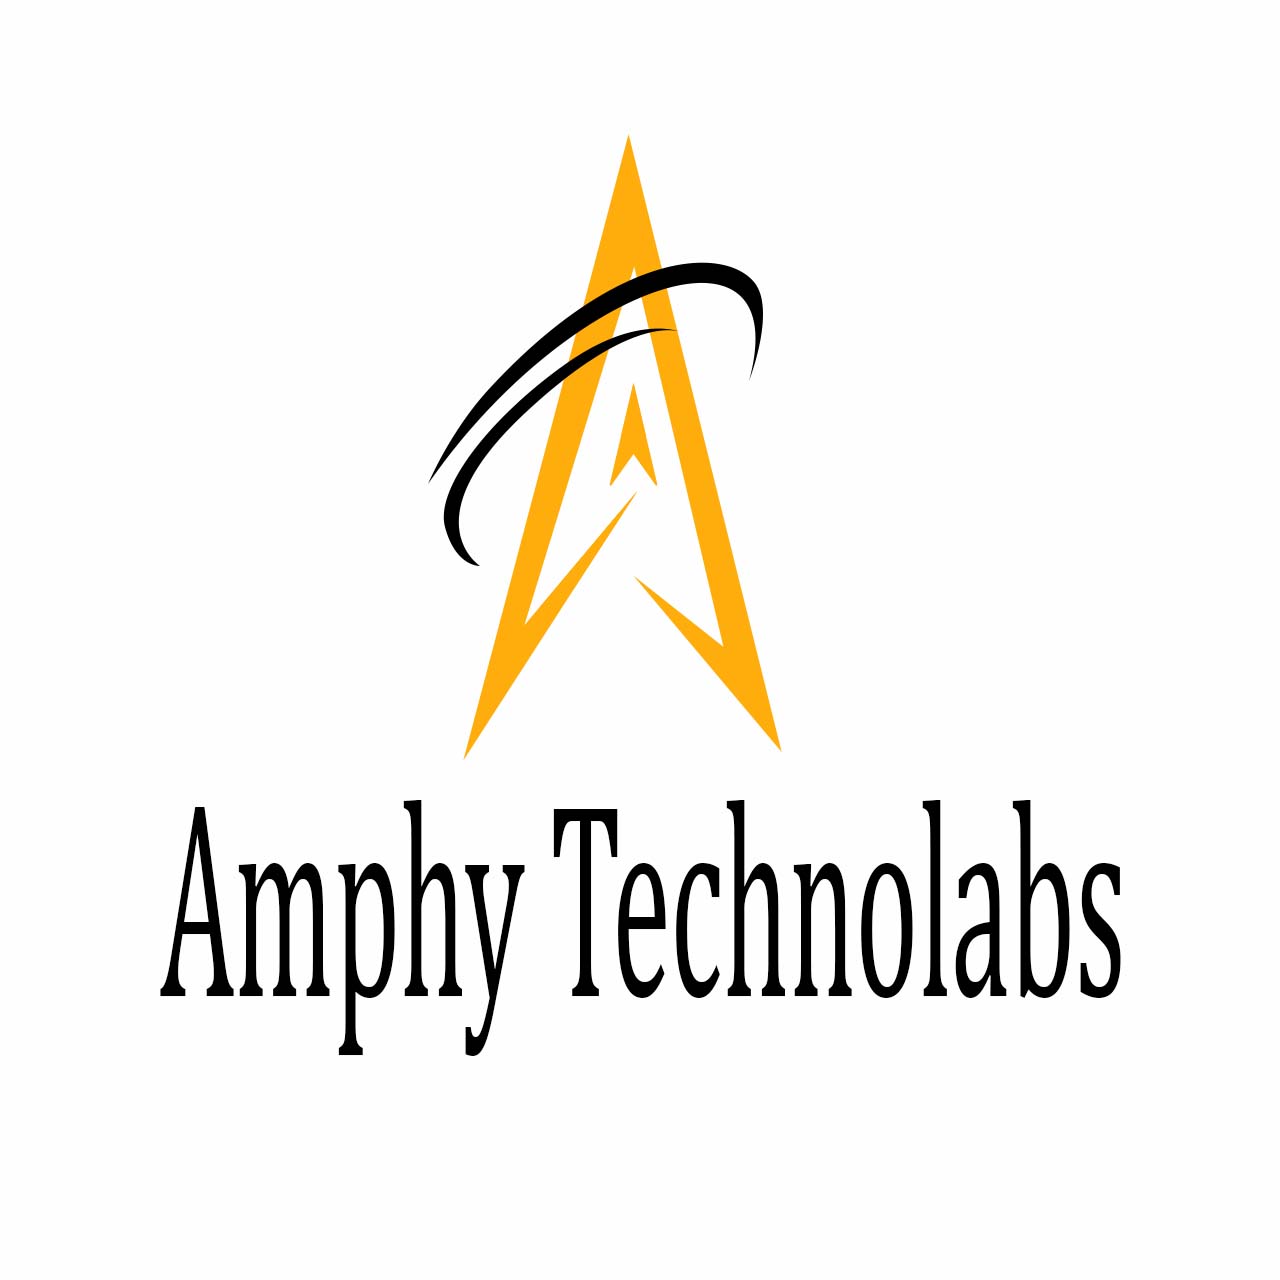 Amphy Technolabs